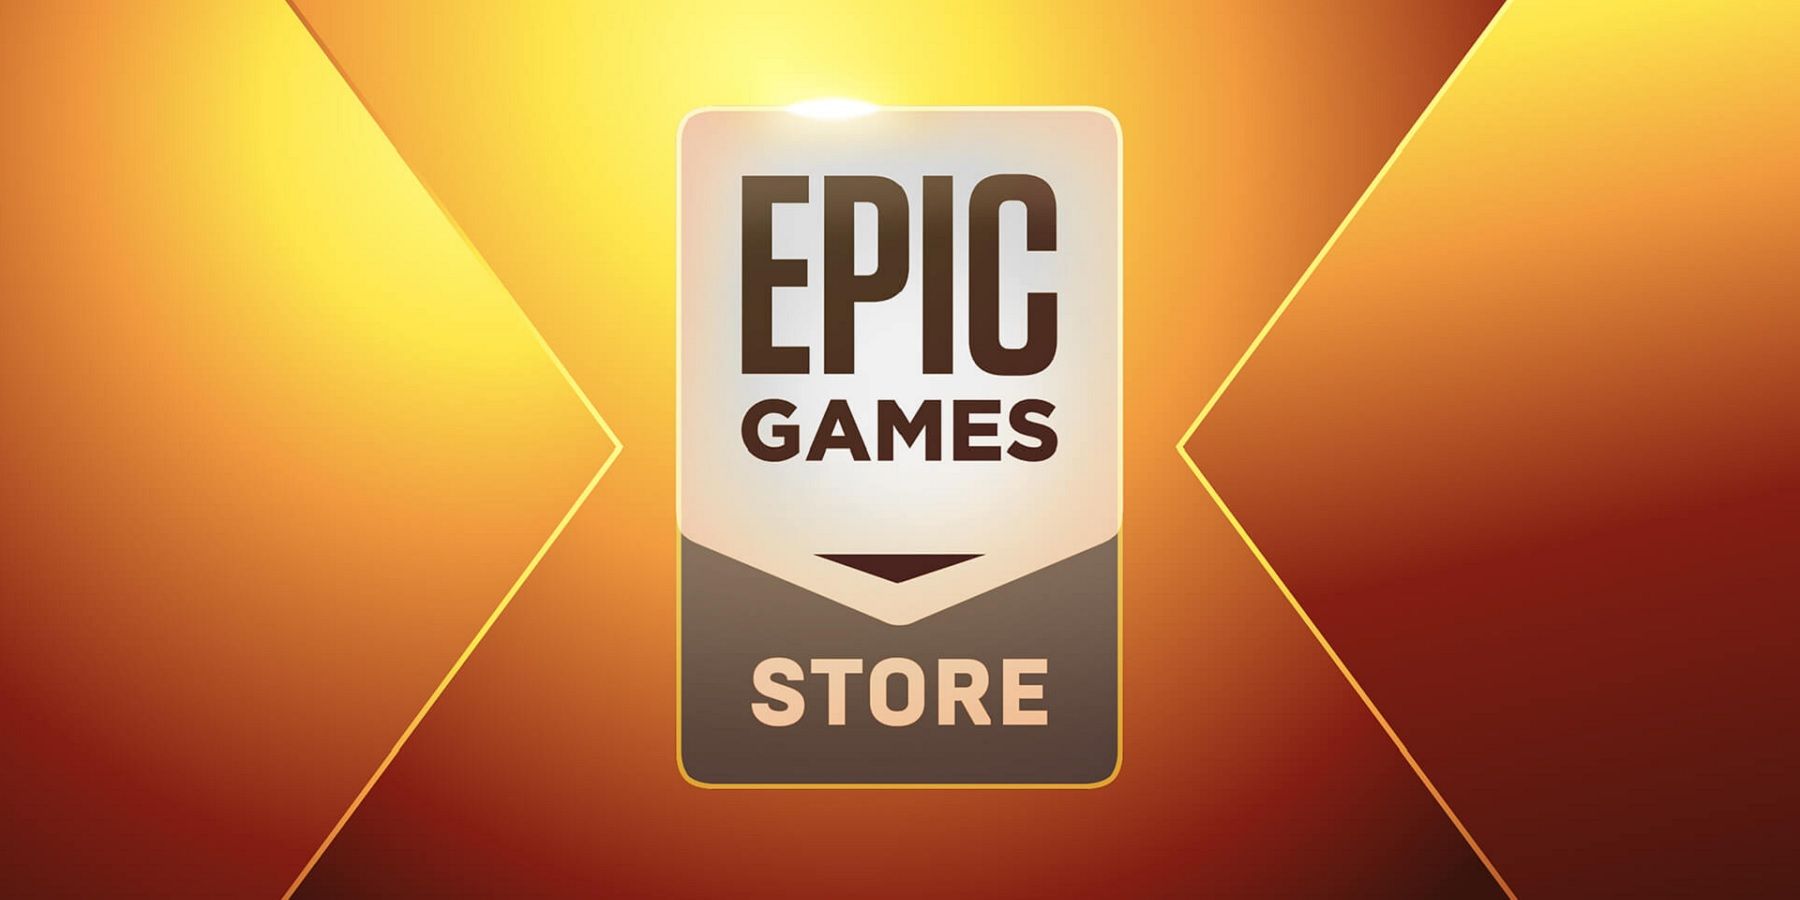 Evil Dead the Game is Free now on Epic Games Store I Claim it